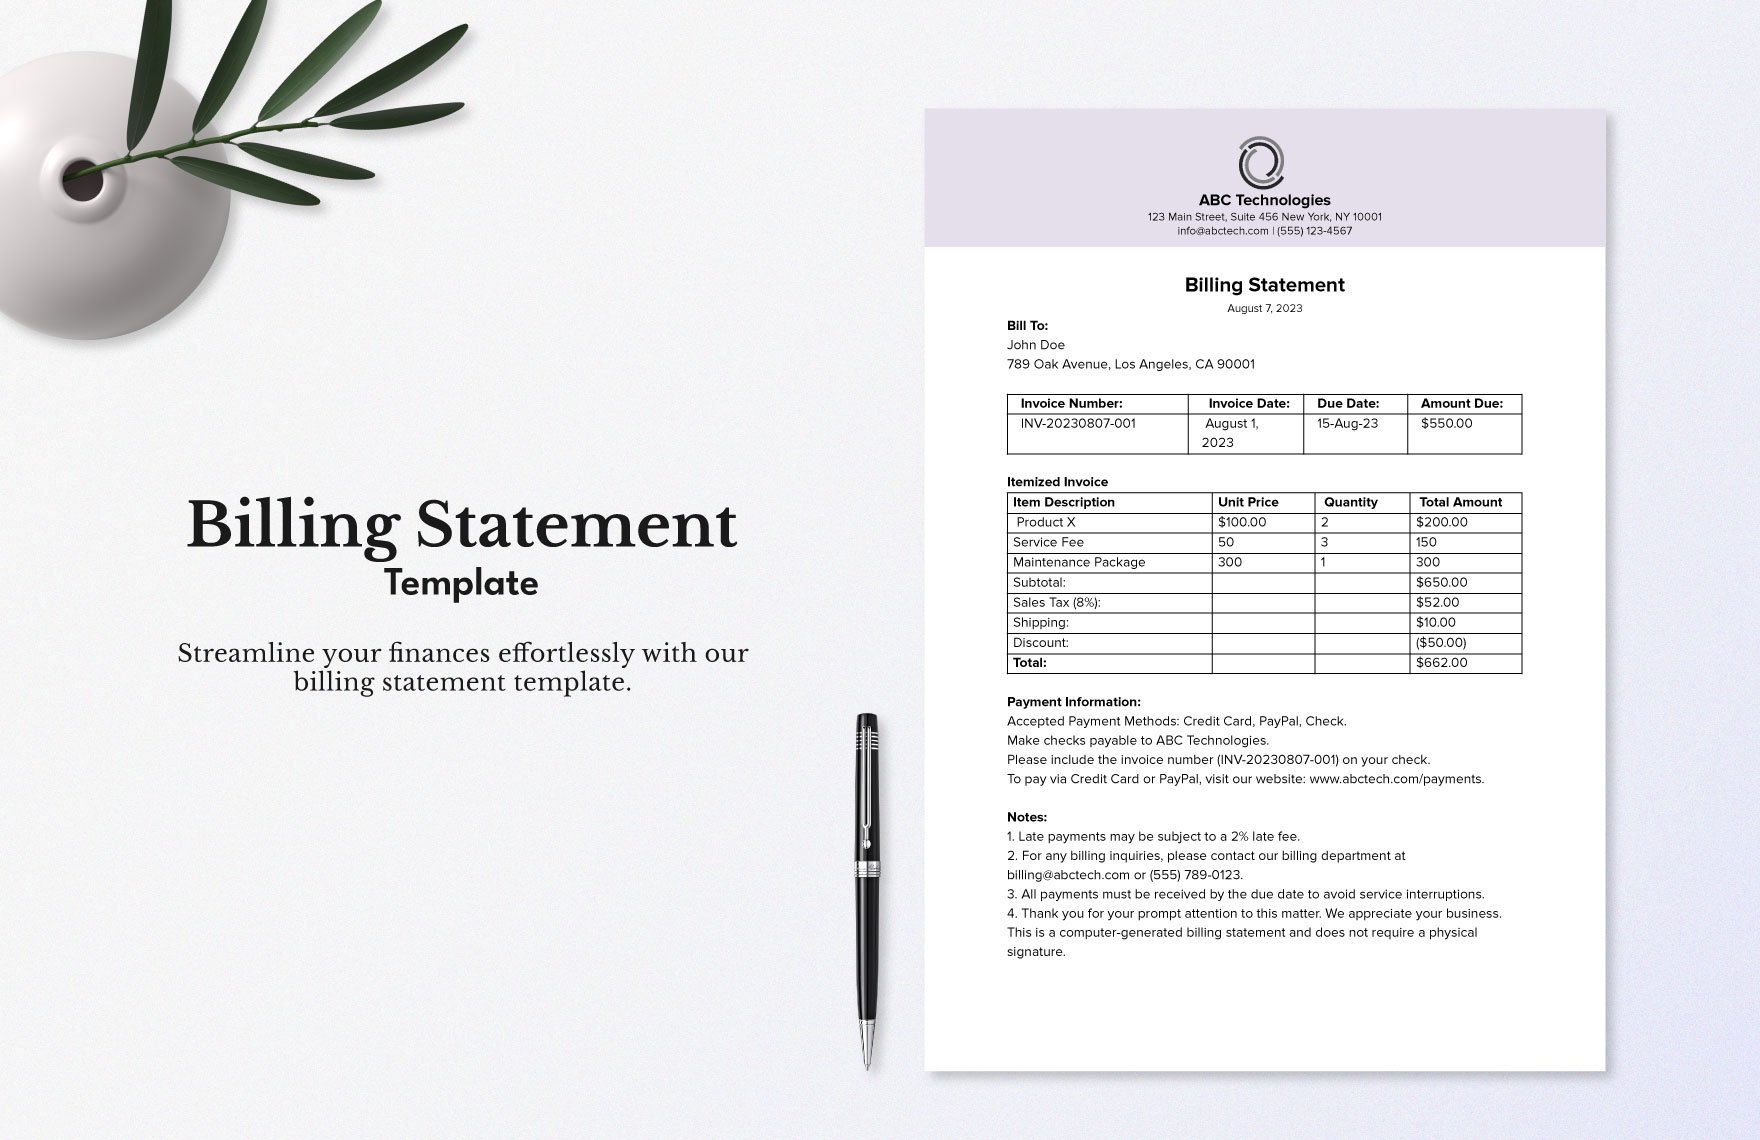 Billing Statement Template in Word, Google Docs, Excel, PDF, Google Sheets, Apple Pages